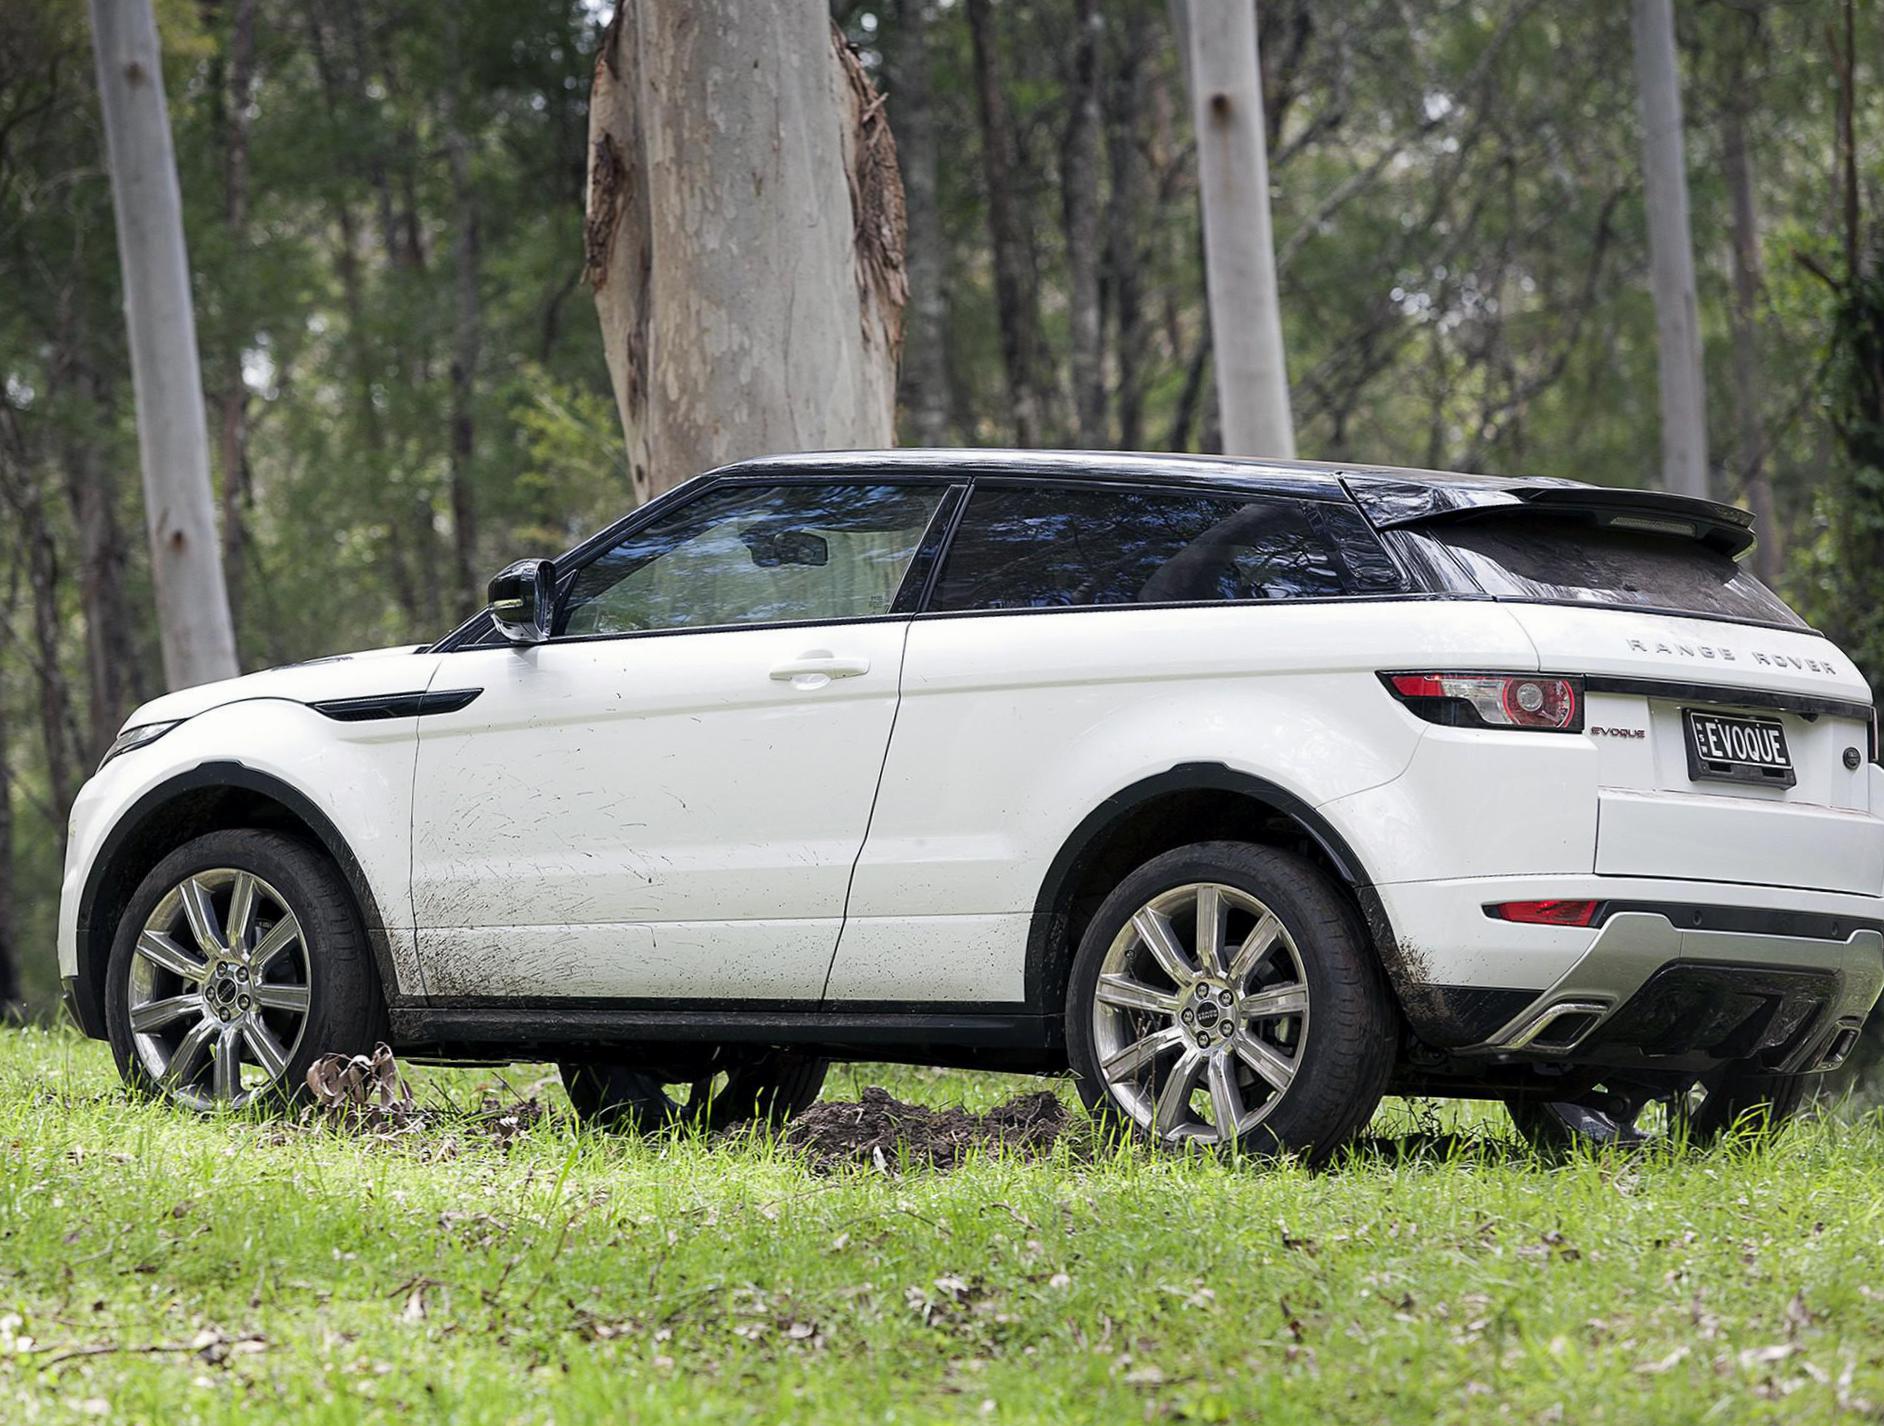 Range Rover Evoque Land Rover approved 2007